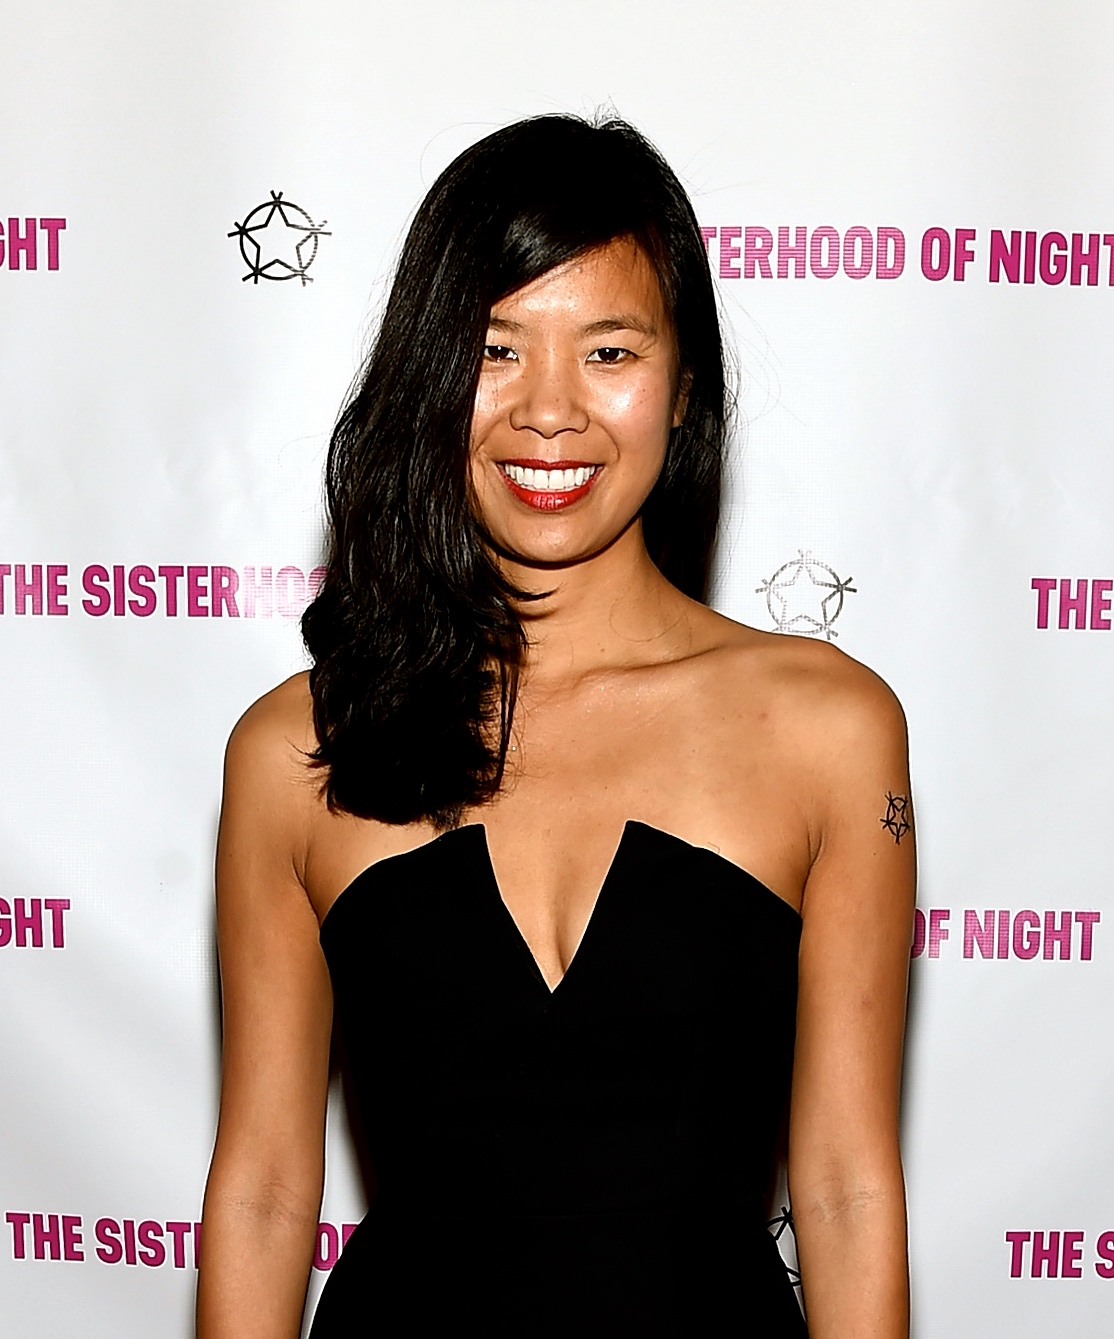 Marilyn Fu at event for The Sisterhood of Night